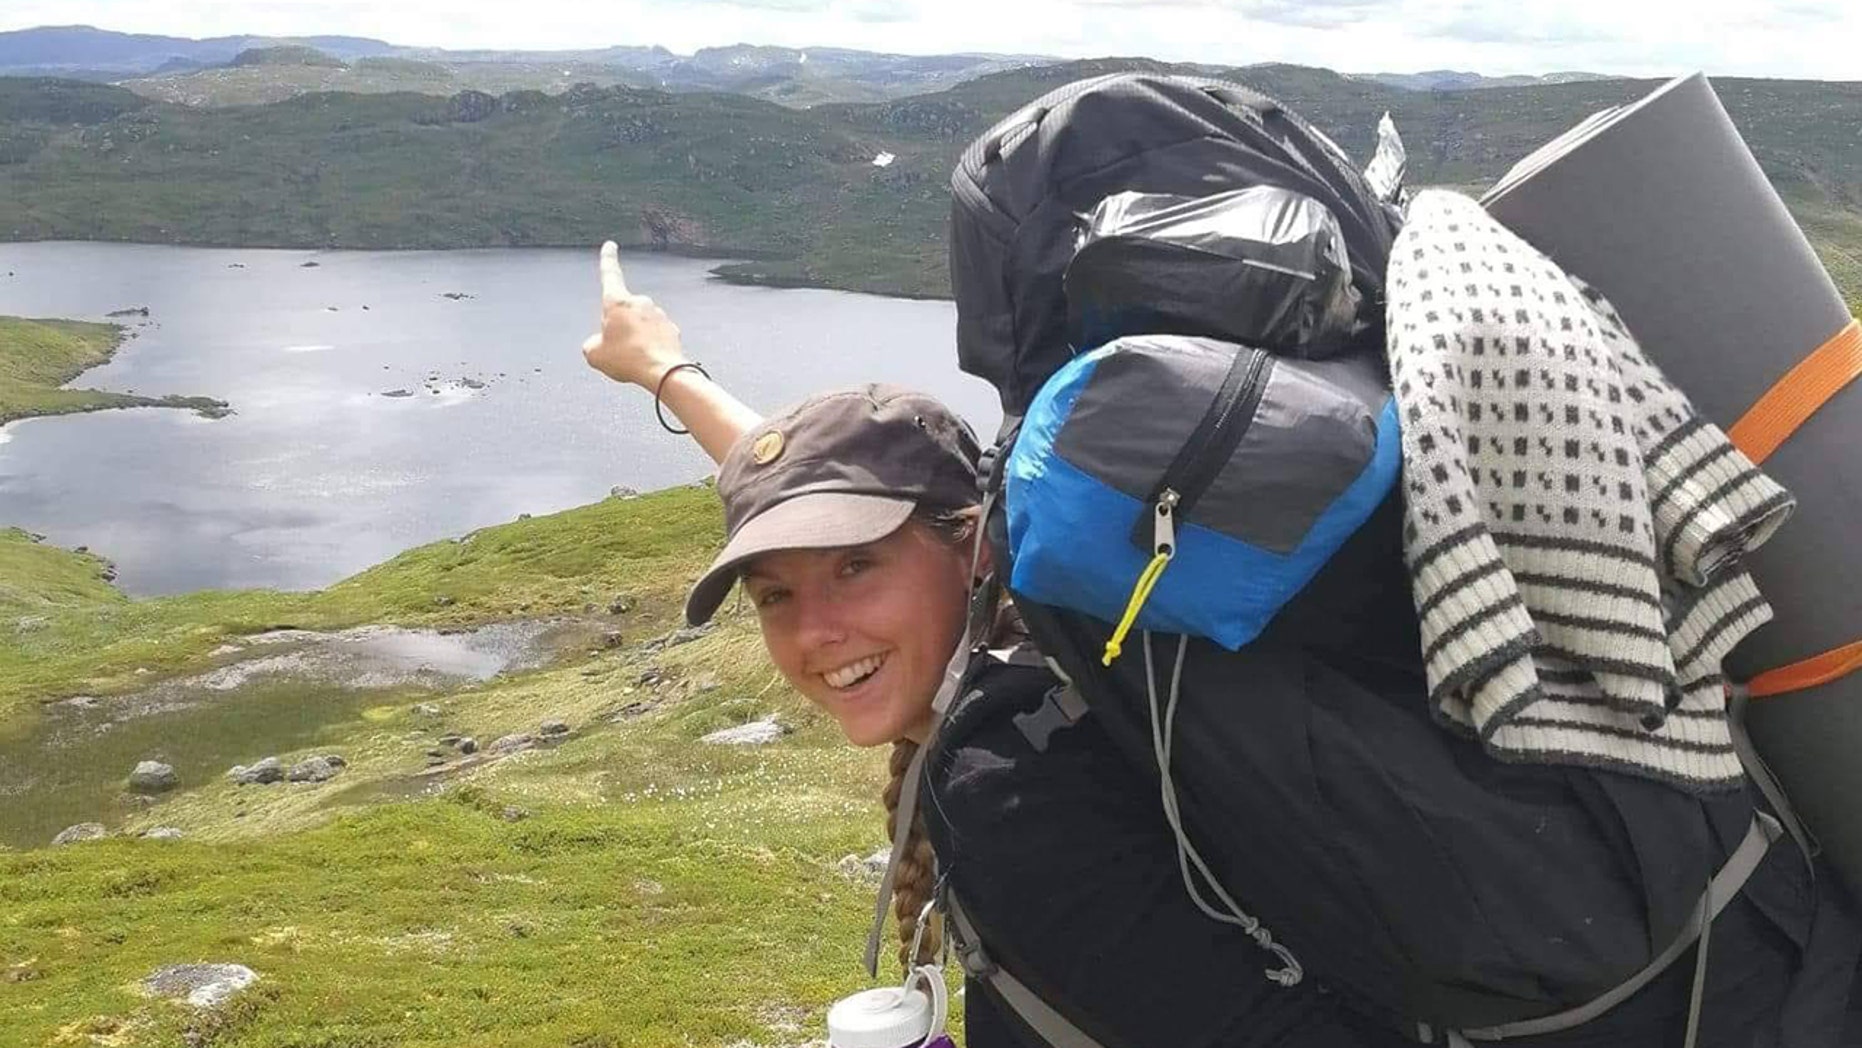 Maren Ueland, 28, from Denmark, was attacked while sleeping in her tent Monday, police believe